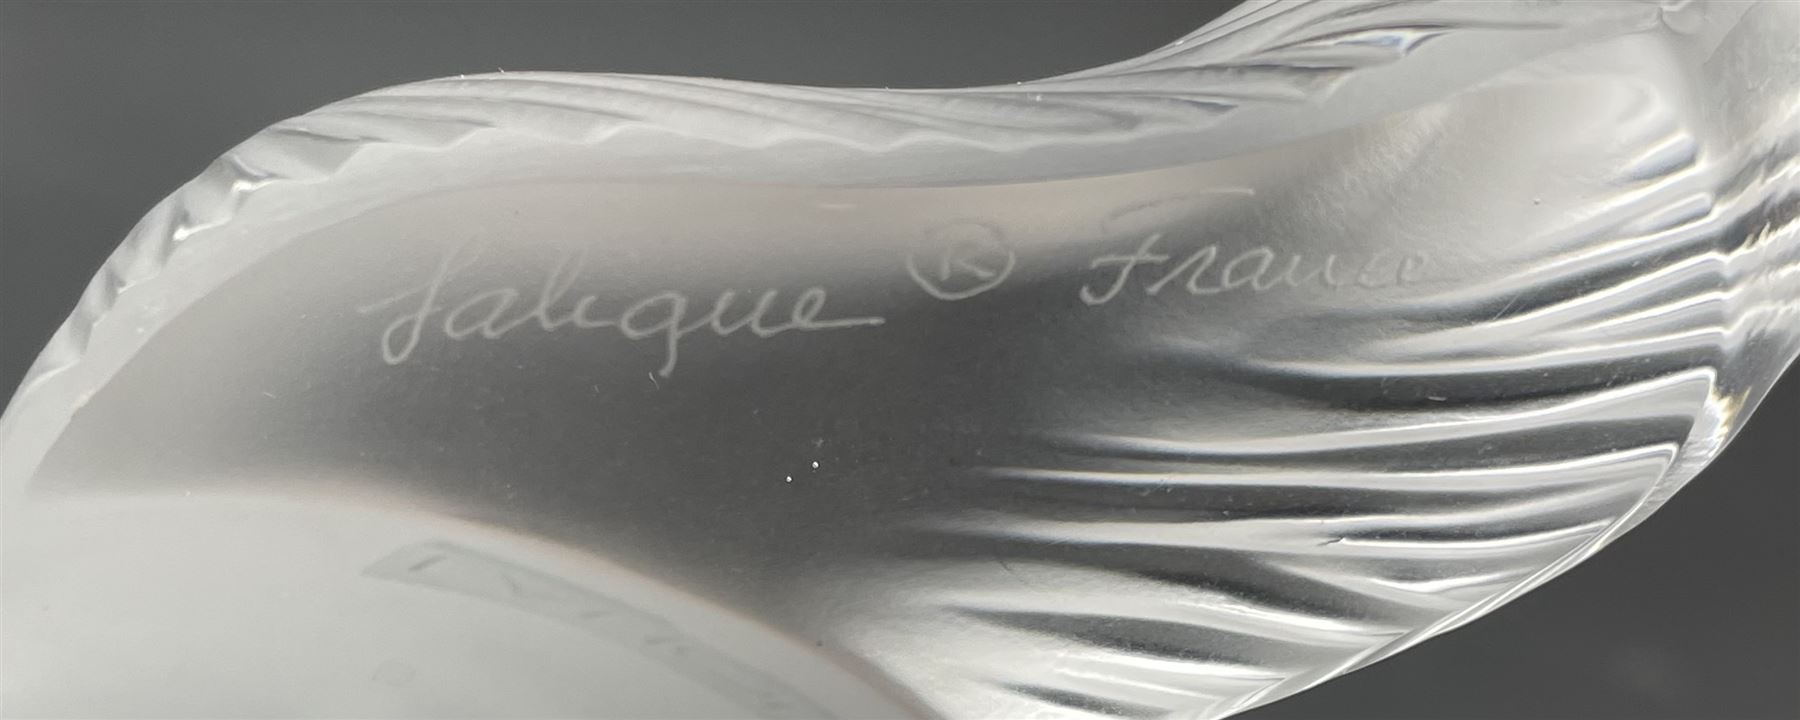 Lalique frosted glass model of a Golden Retriever - Image 3 of 3